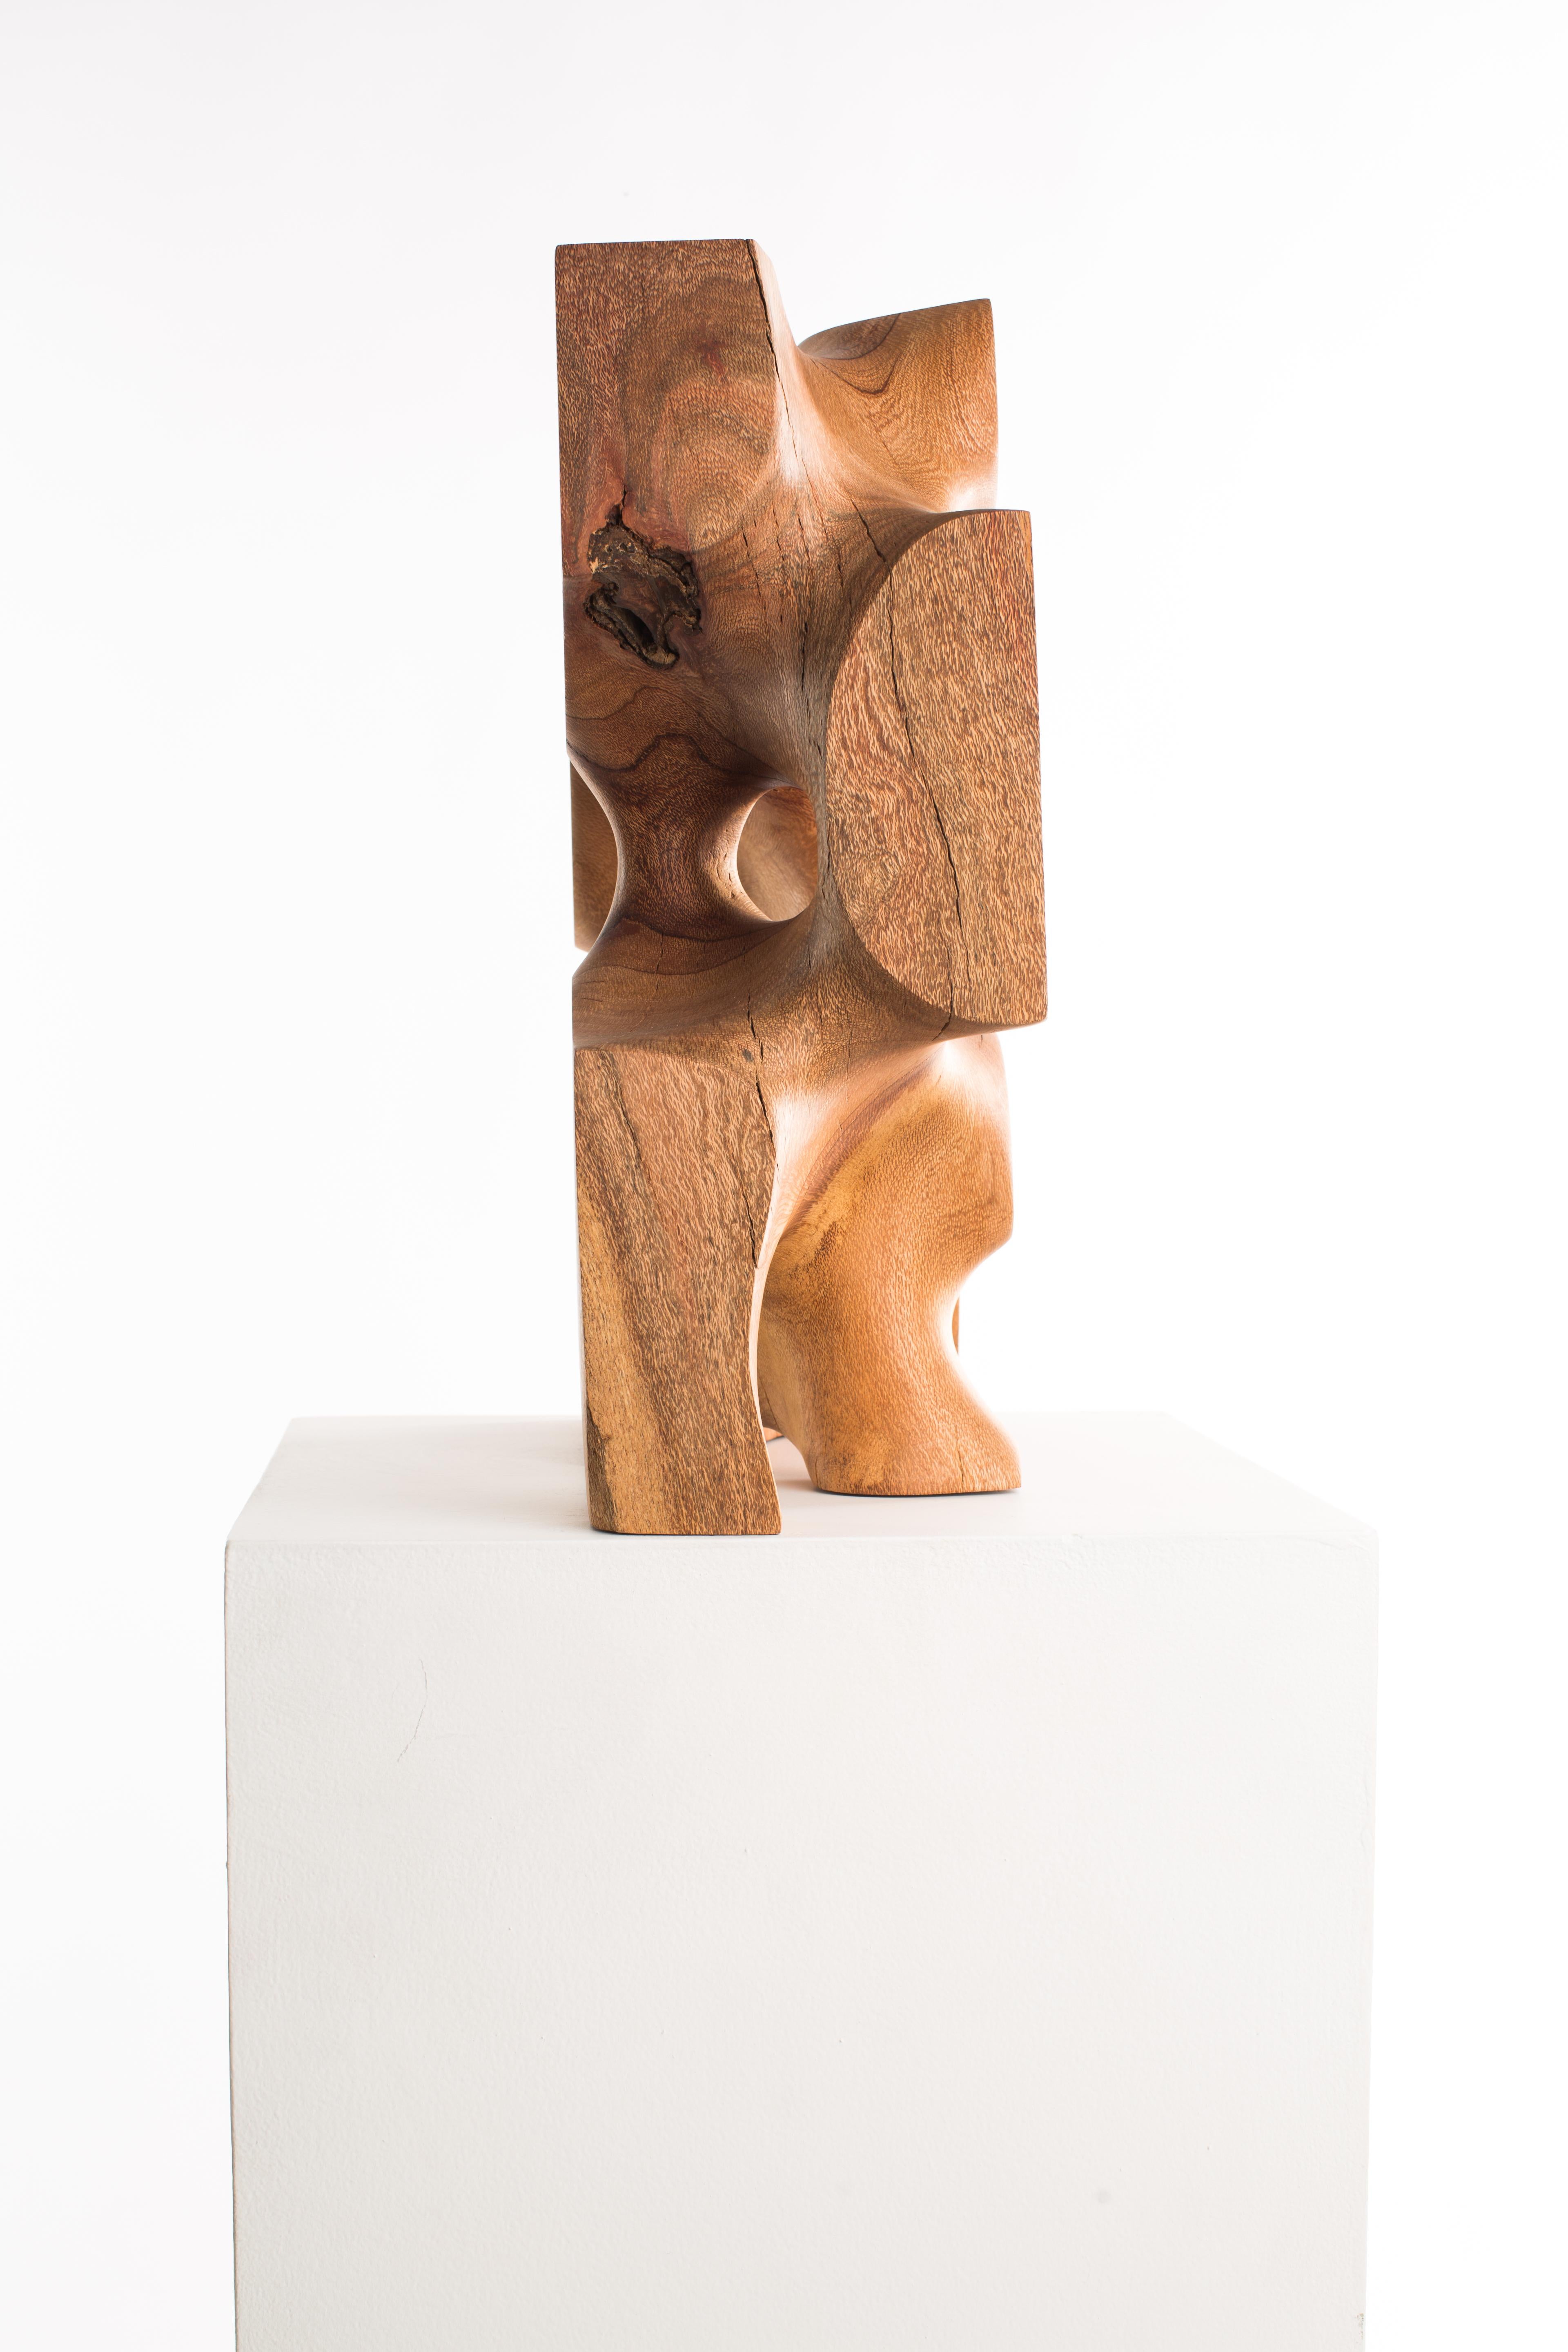 Wooden Cuboid 007 
1/1
Silky Oak
45cm x 37cm x16,5 cm 
9.3Kg
2020

Crystalized Sculptures is an abstracted exploration of marks left on the physical mind by experiences of emotion and feelings. In Driaan Claassens' work, where whisps portray the